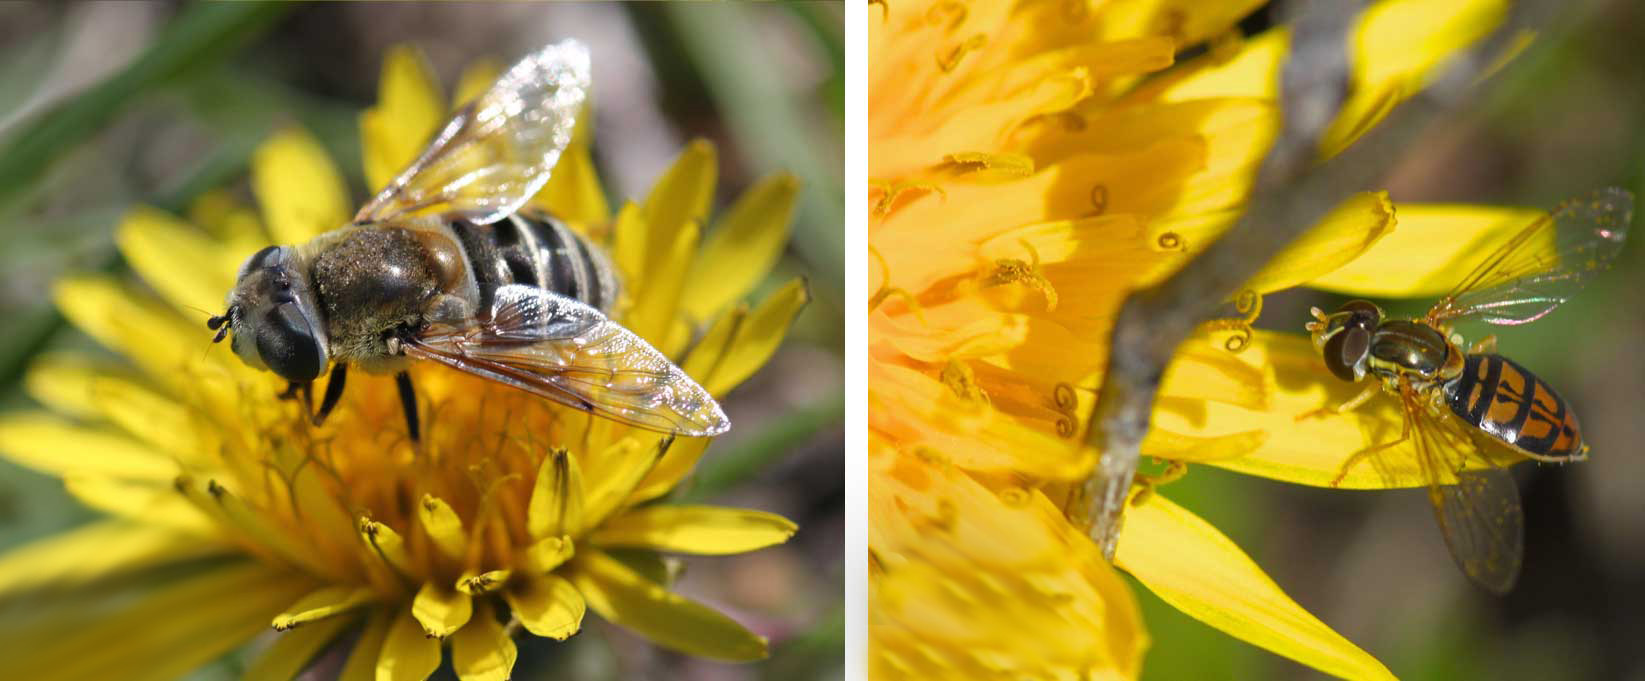 Two dandelions side by side. The left has a large fly with white and black striped abdomen foraging on it. The right has a small fly with orange and black patterned abdomen foraging on it.